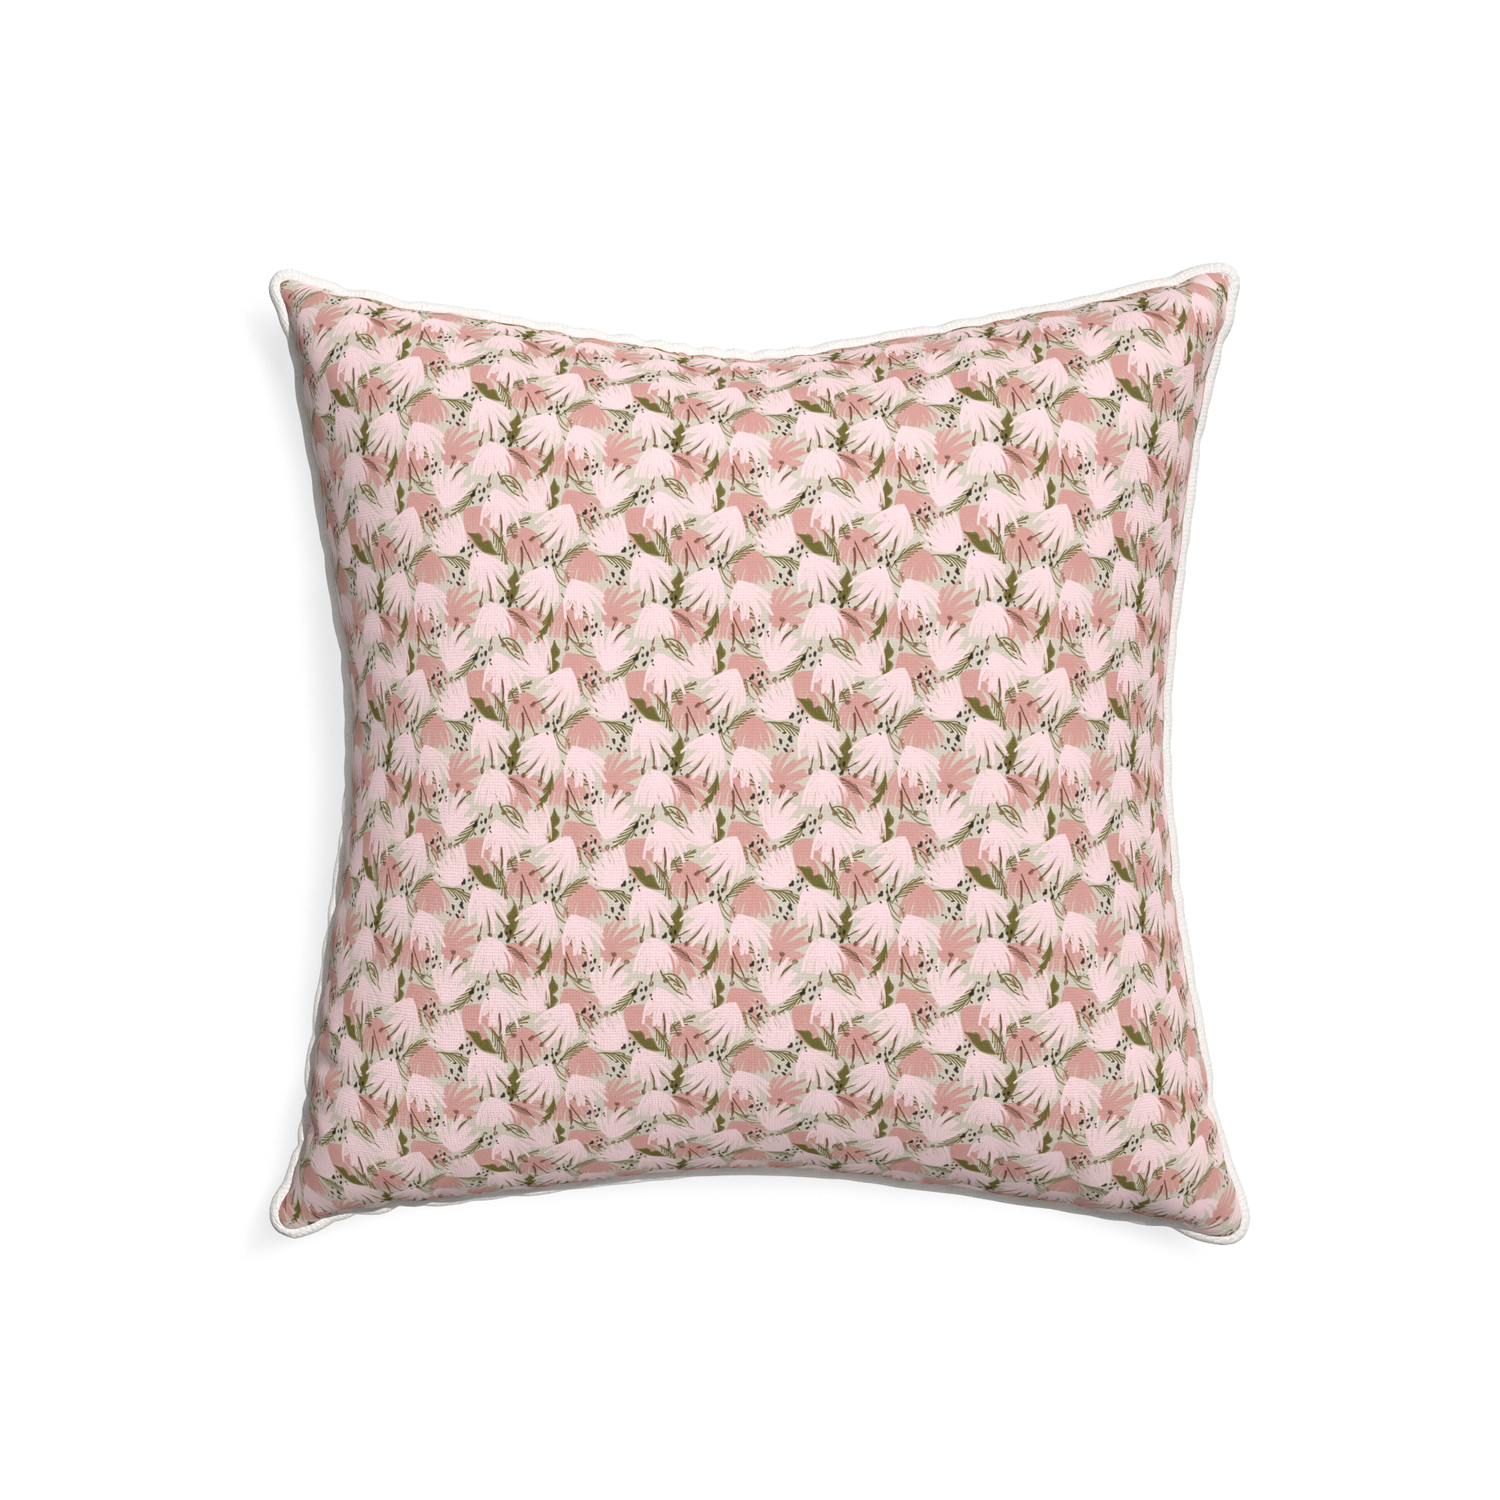 22-square eden pink custom pillow with snow piping on white background